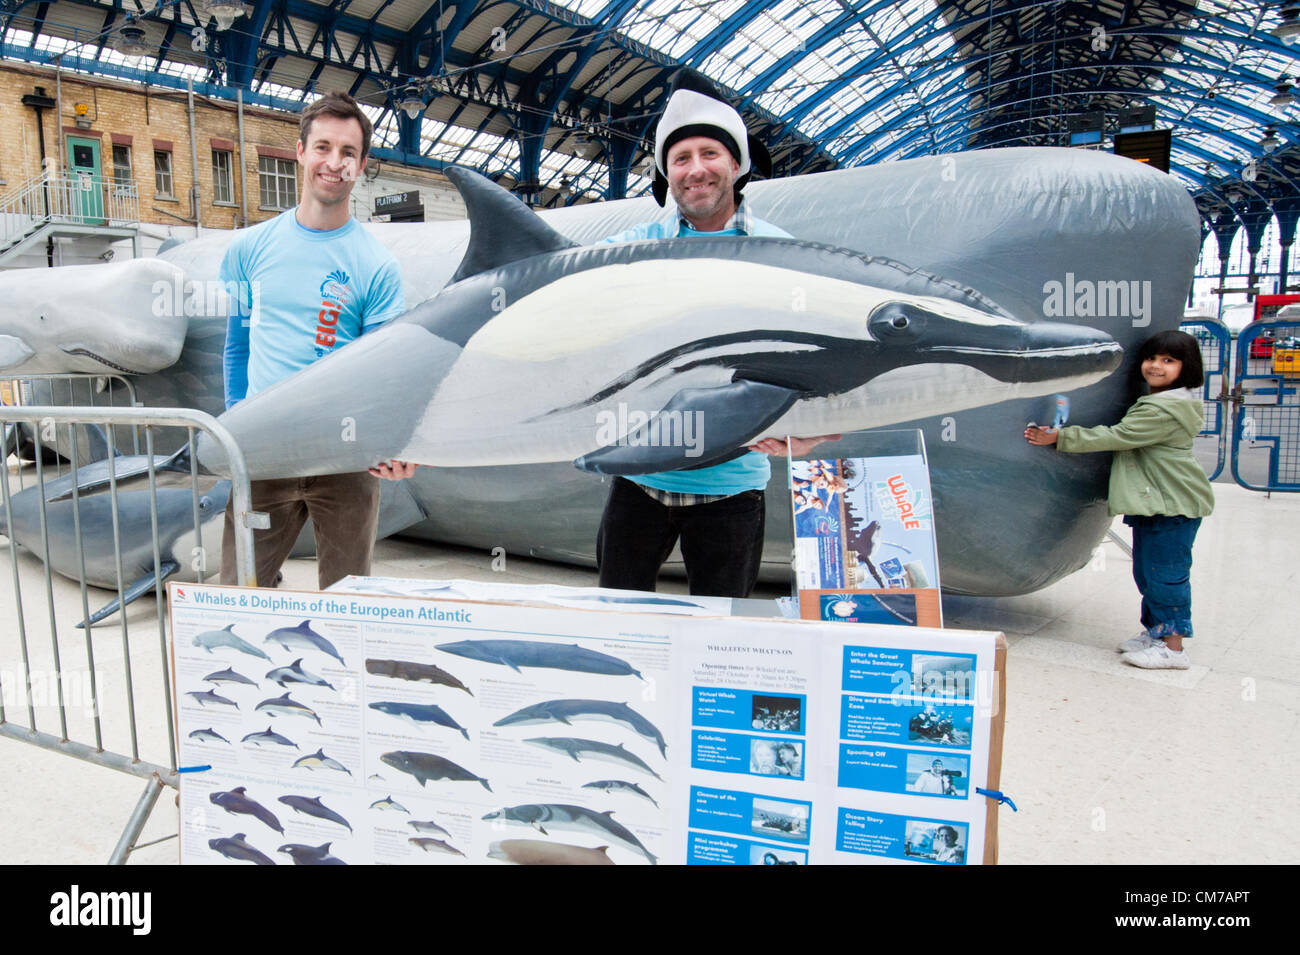 Brighton, UK. 21st October, 2012. Co founders of Whalefest Dylan Walker and Ian Rowlands with a common dolphin and the Whale now standing at platfroms 1,2,and 3 of Brighton Station is a 13 metre female Sperm Whale. She, her calf and friends will be arriving at Whalefest at Brighton Hilton Metropole on 27th and 28th October 2012. phot Credit: Julia Claxton/Alamy Live News Stock Photo